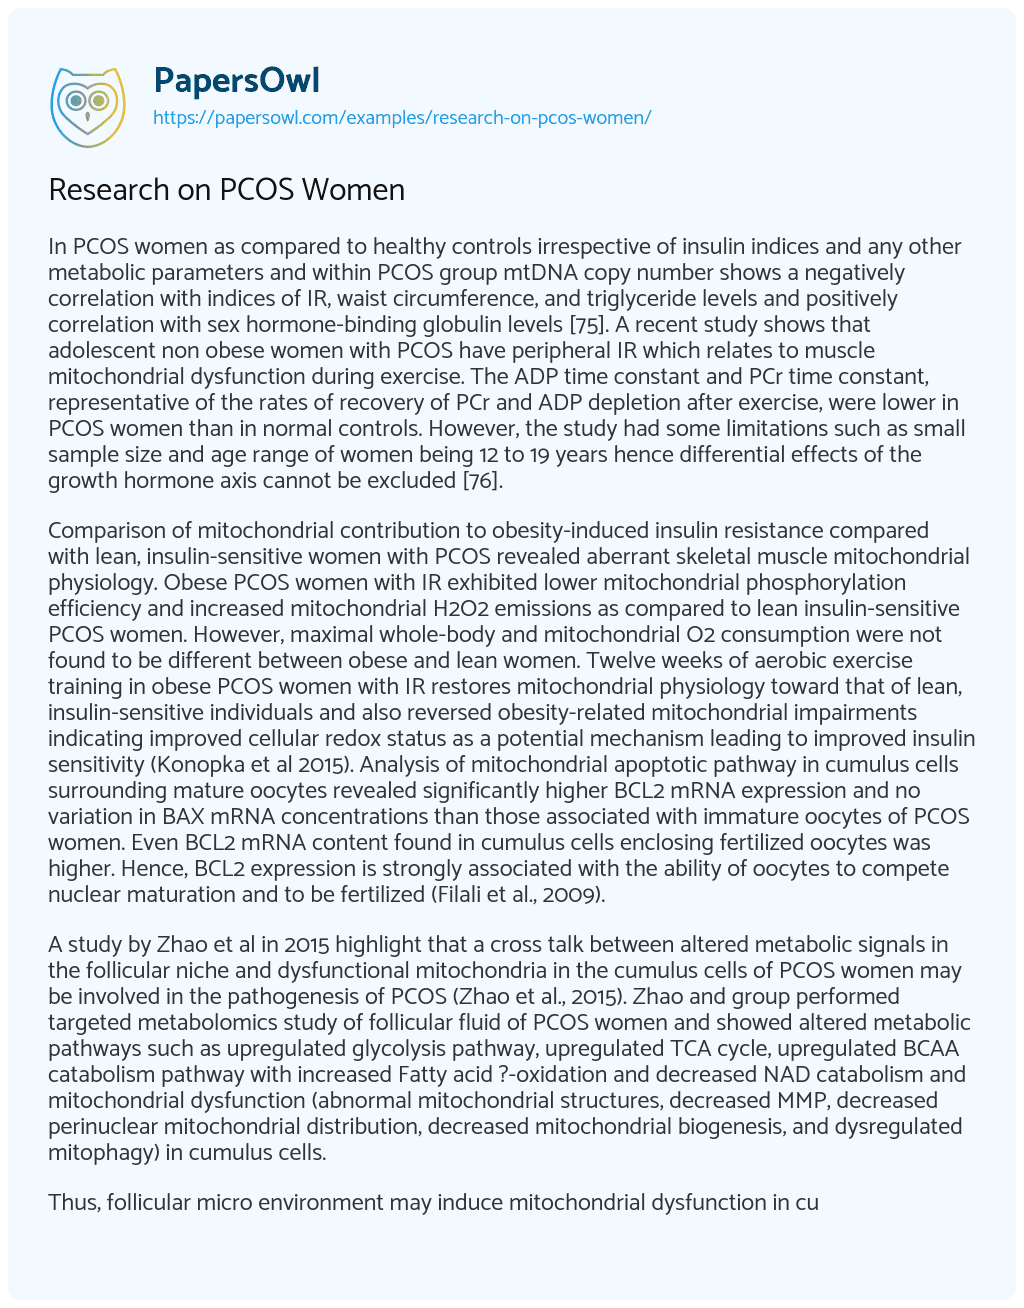 Essay on Research on PCOS Women